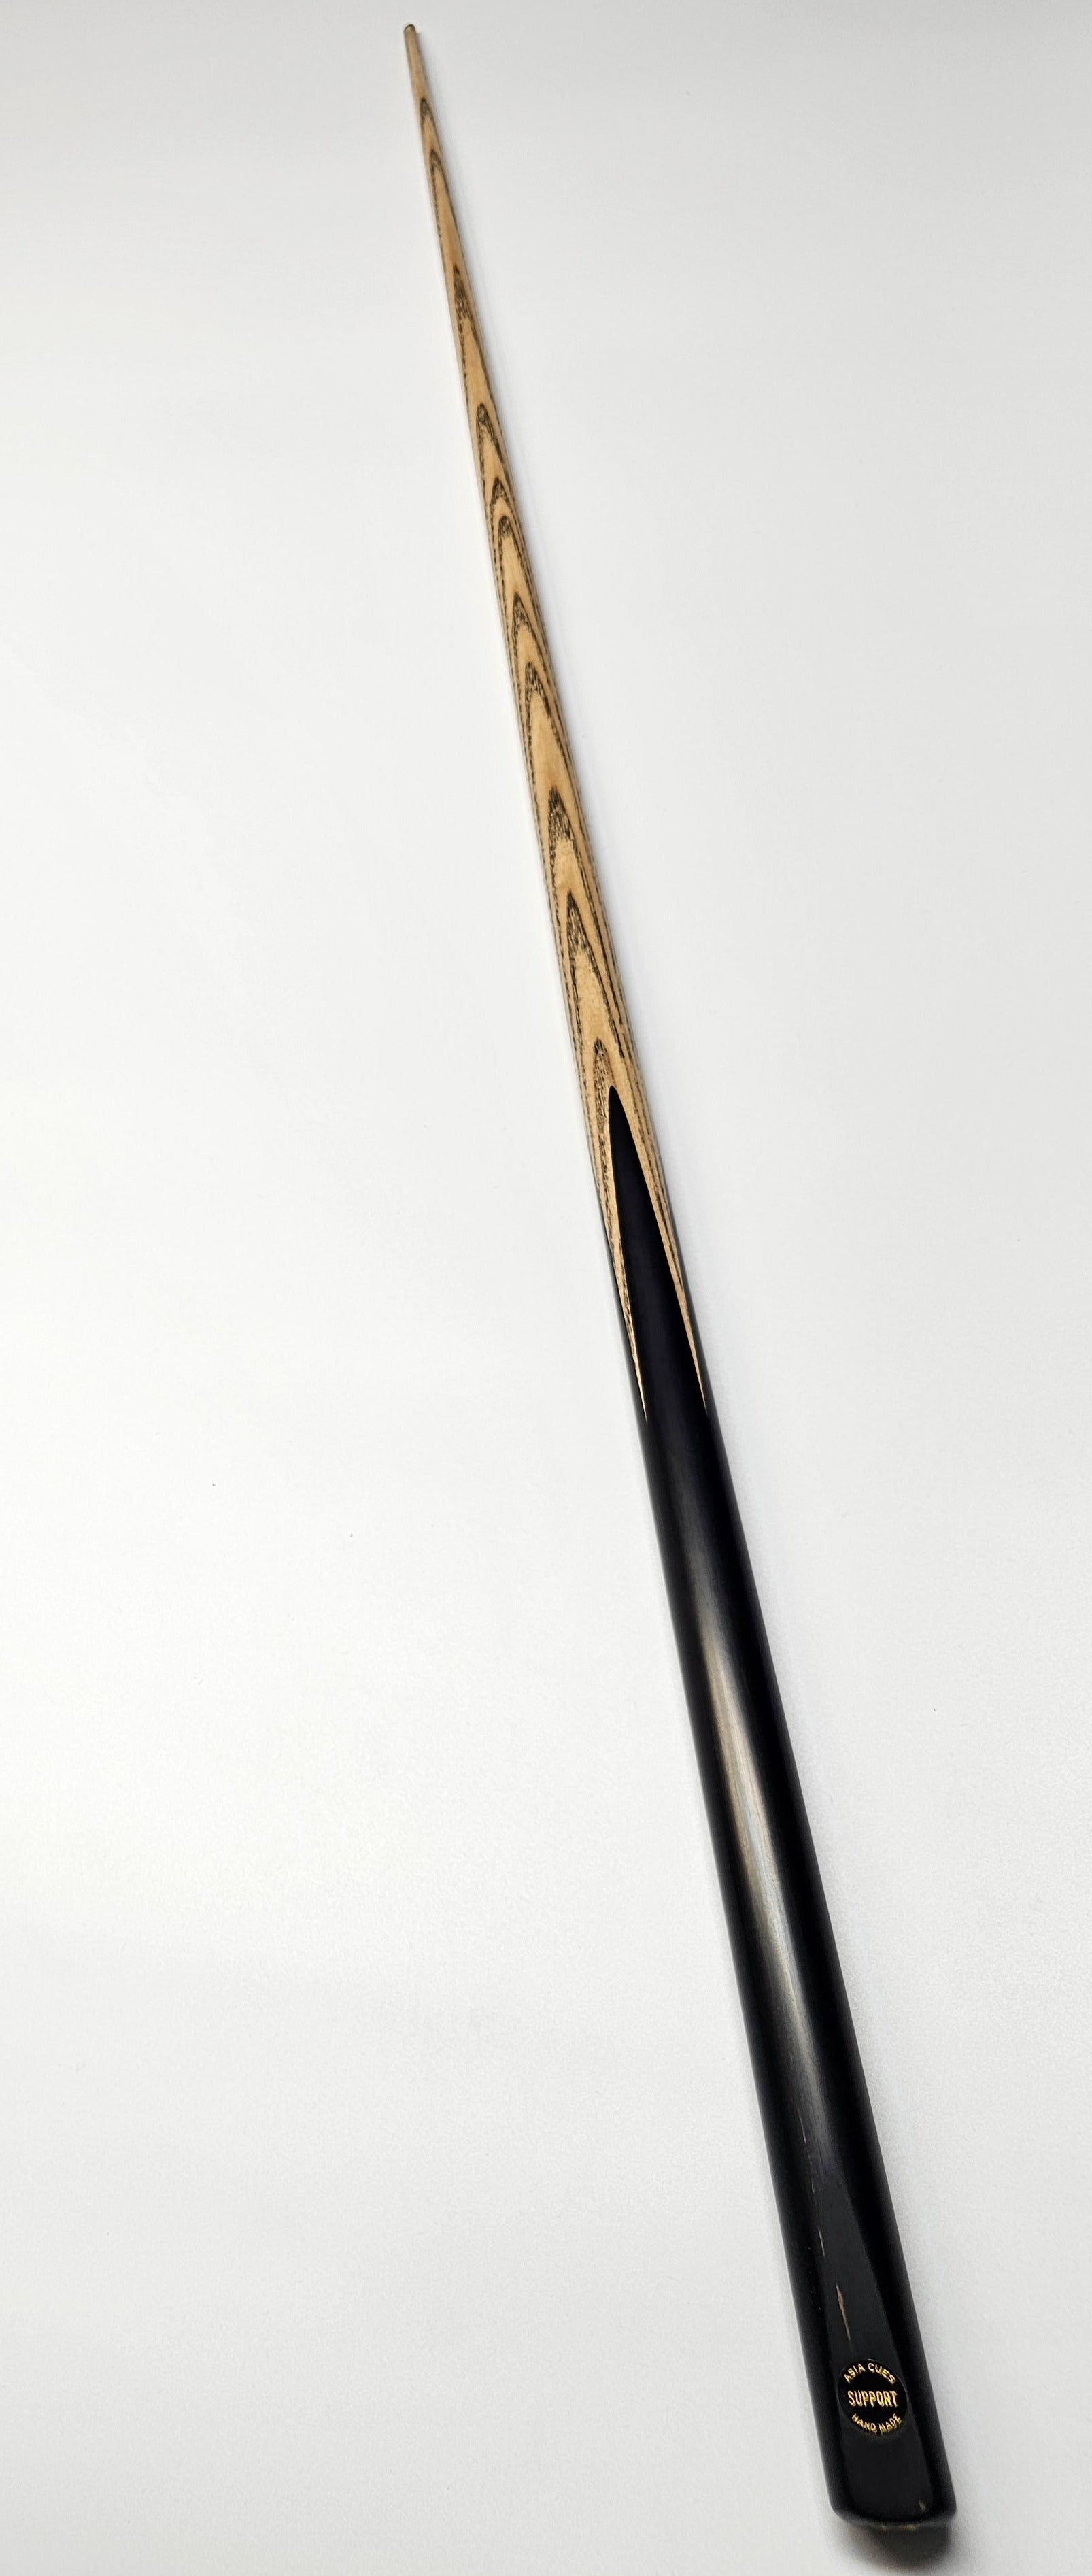 Asia Cues Support - One Piece Snooker Cue  Handmade Ebony Butt. Full Lengh View